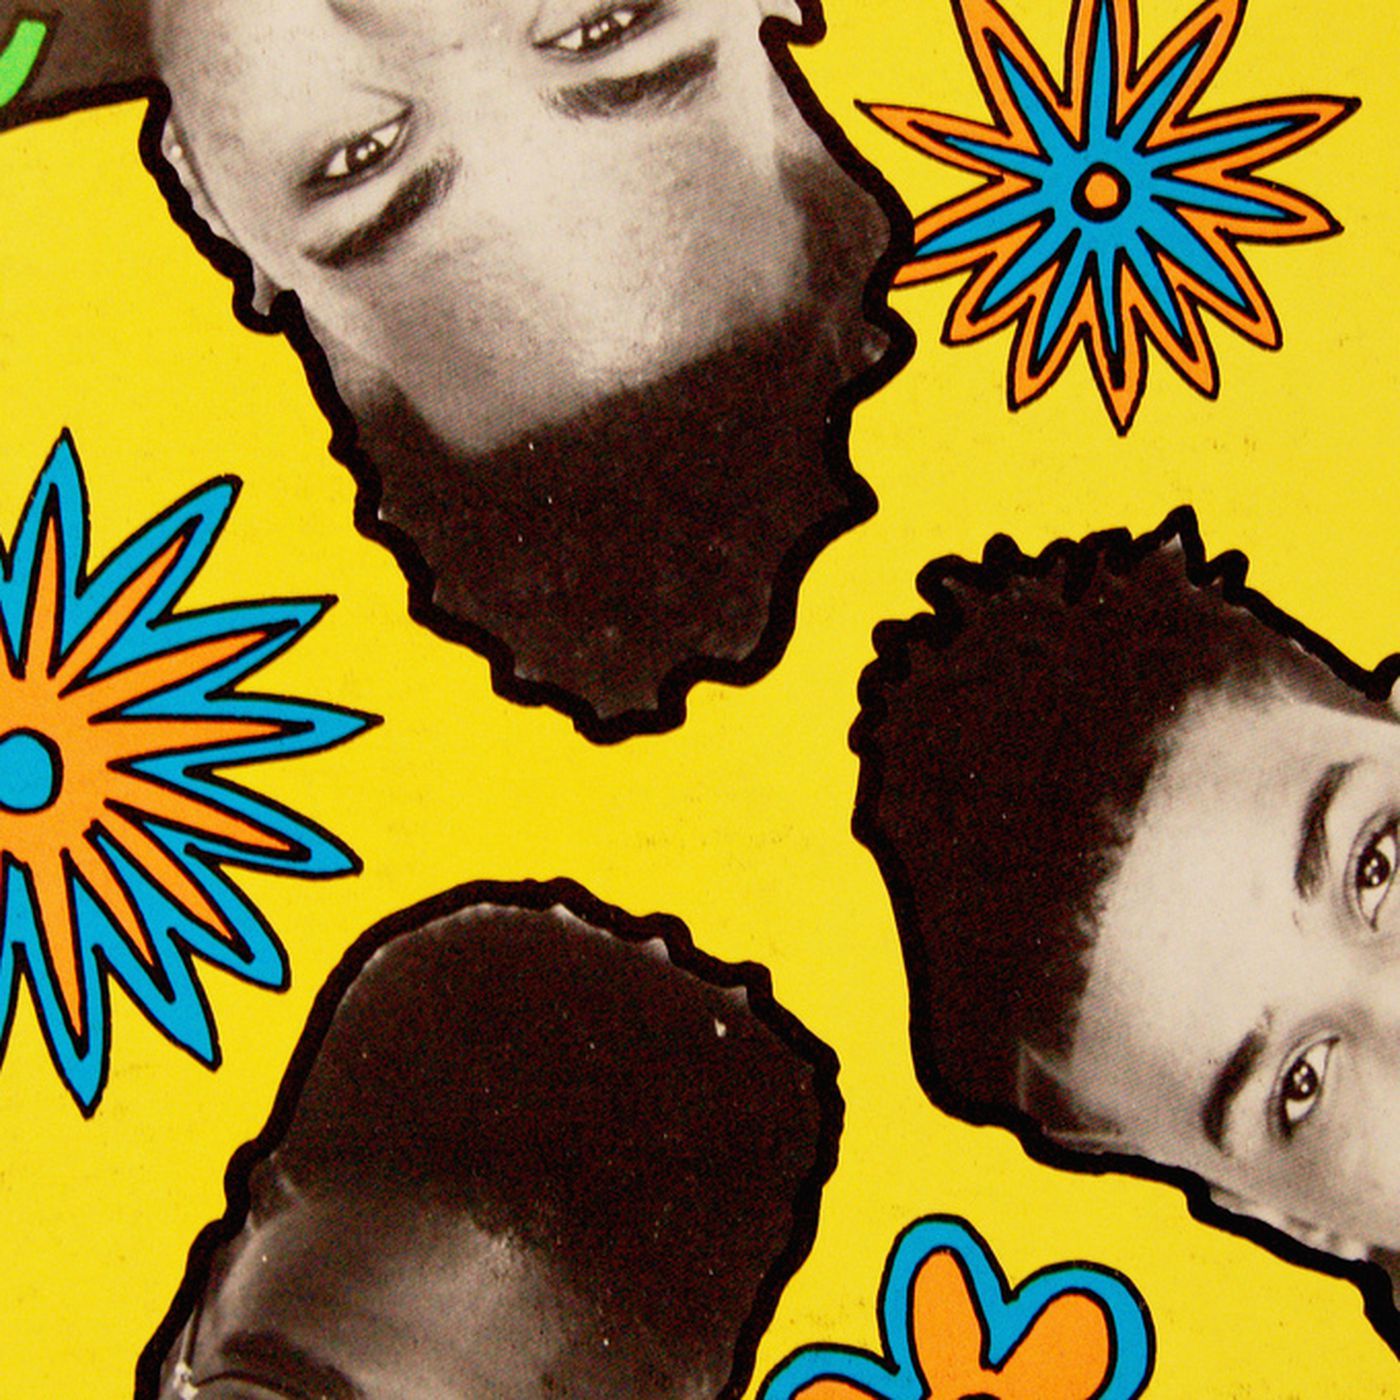 De La Soul may have distributed pirated MP3s during music giveaway